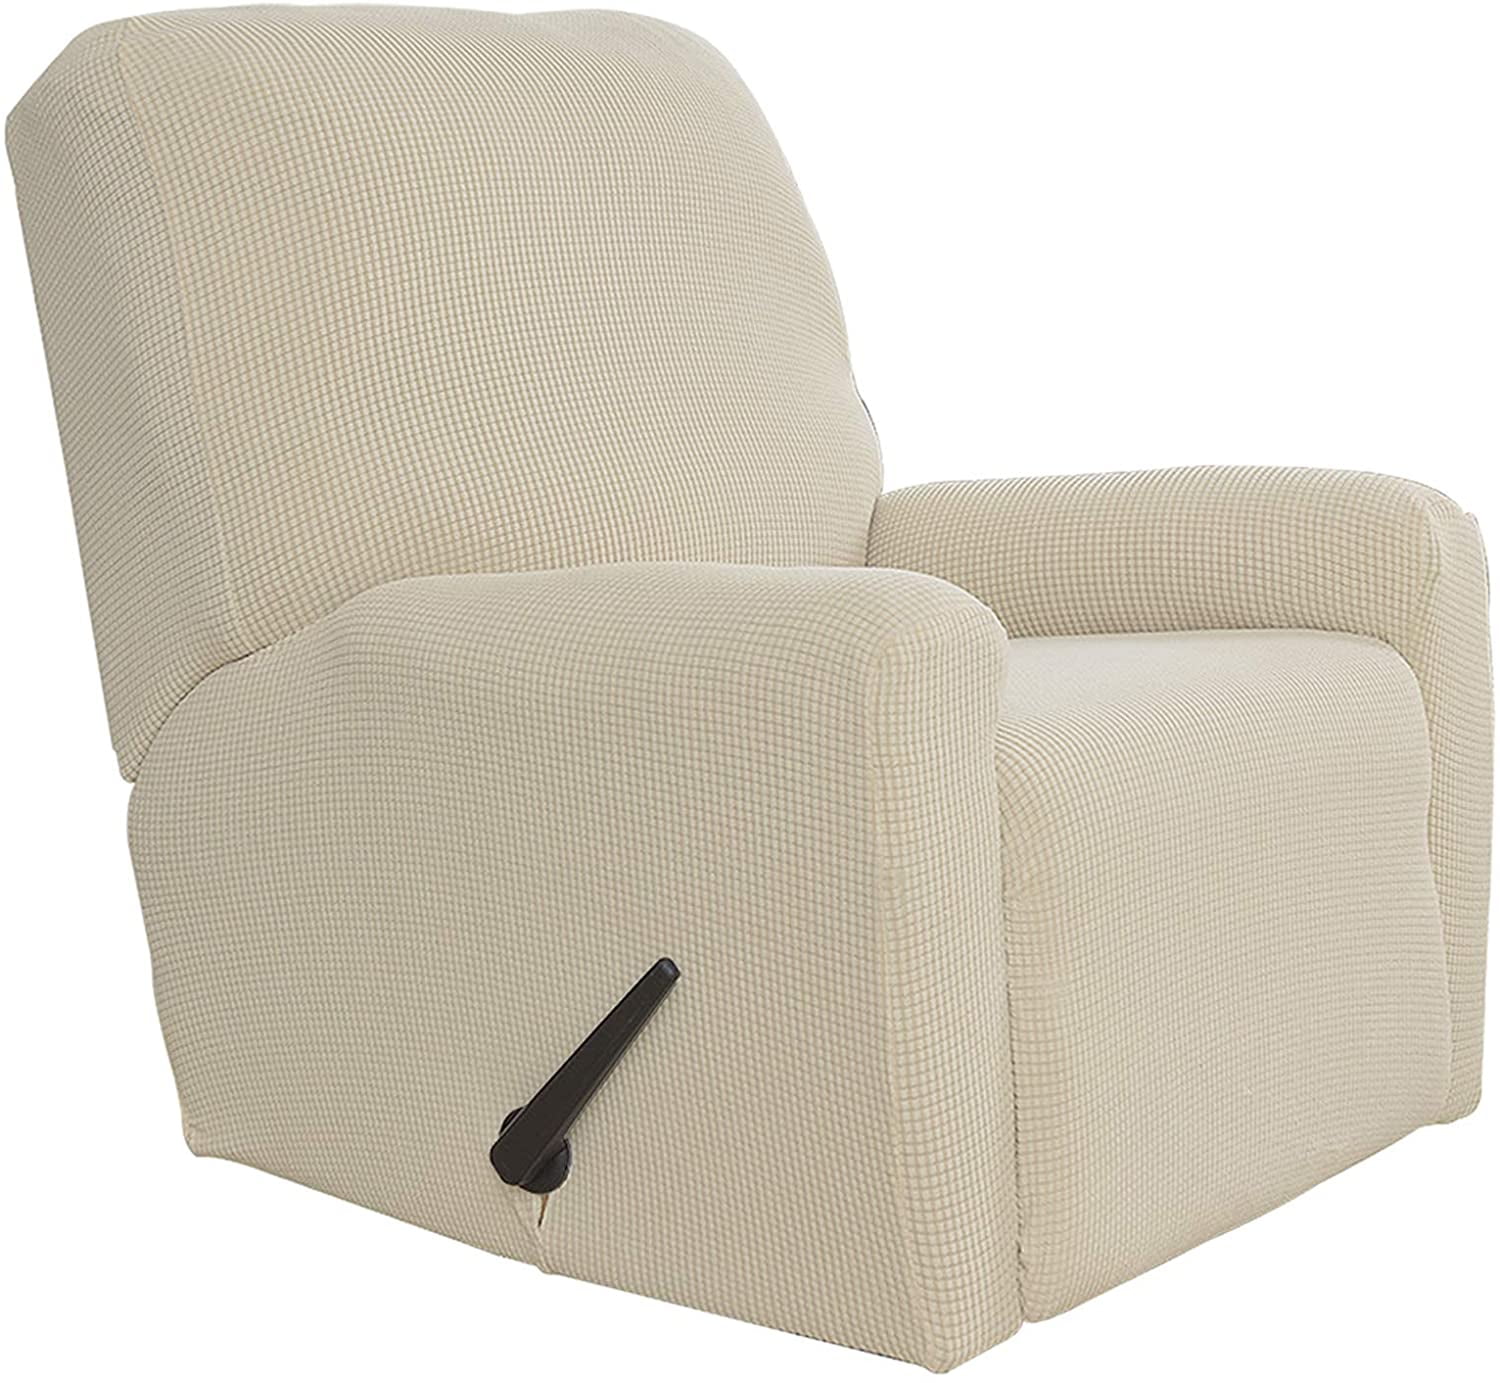 Details about   Recliner Arm Chair Cover Recliner Slipcover Lazy Boy Protector Stays In Place 